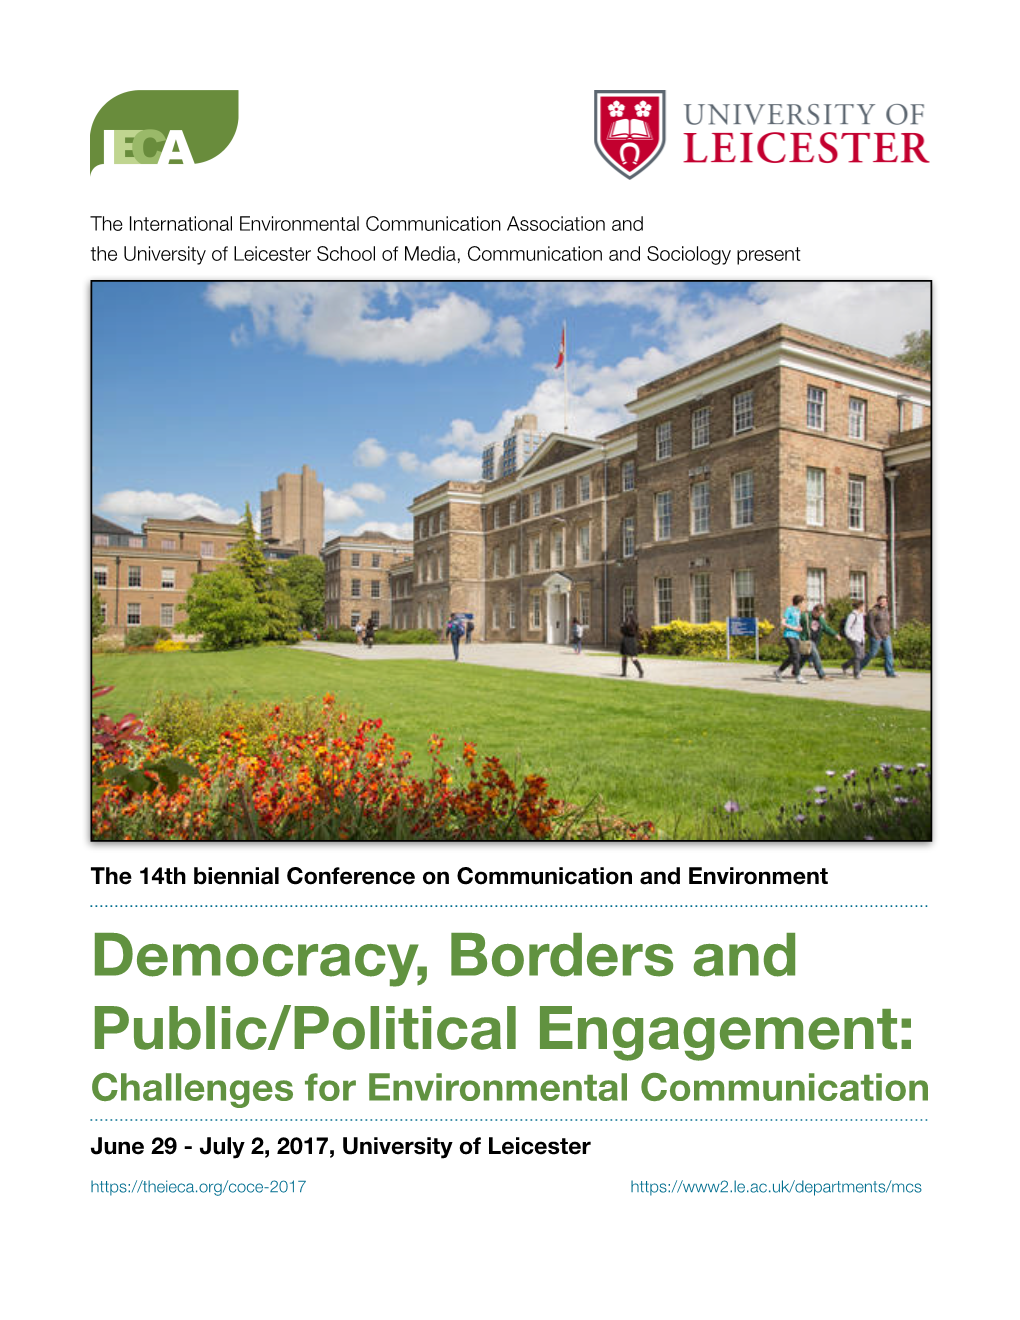 Democracy, Borders and Public/Political Engagement: Challenges for Environmental Communication